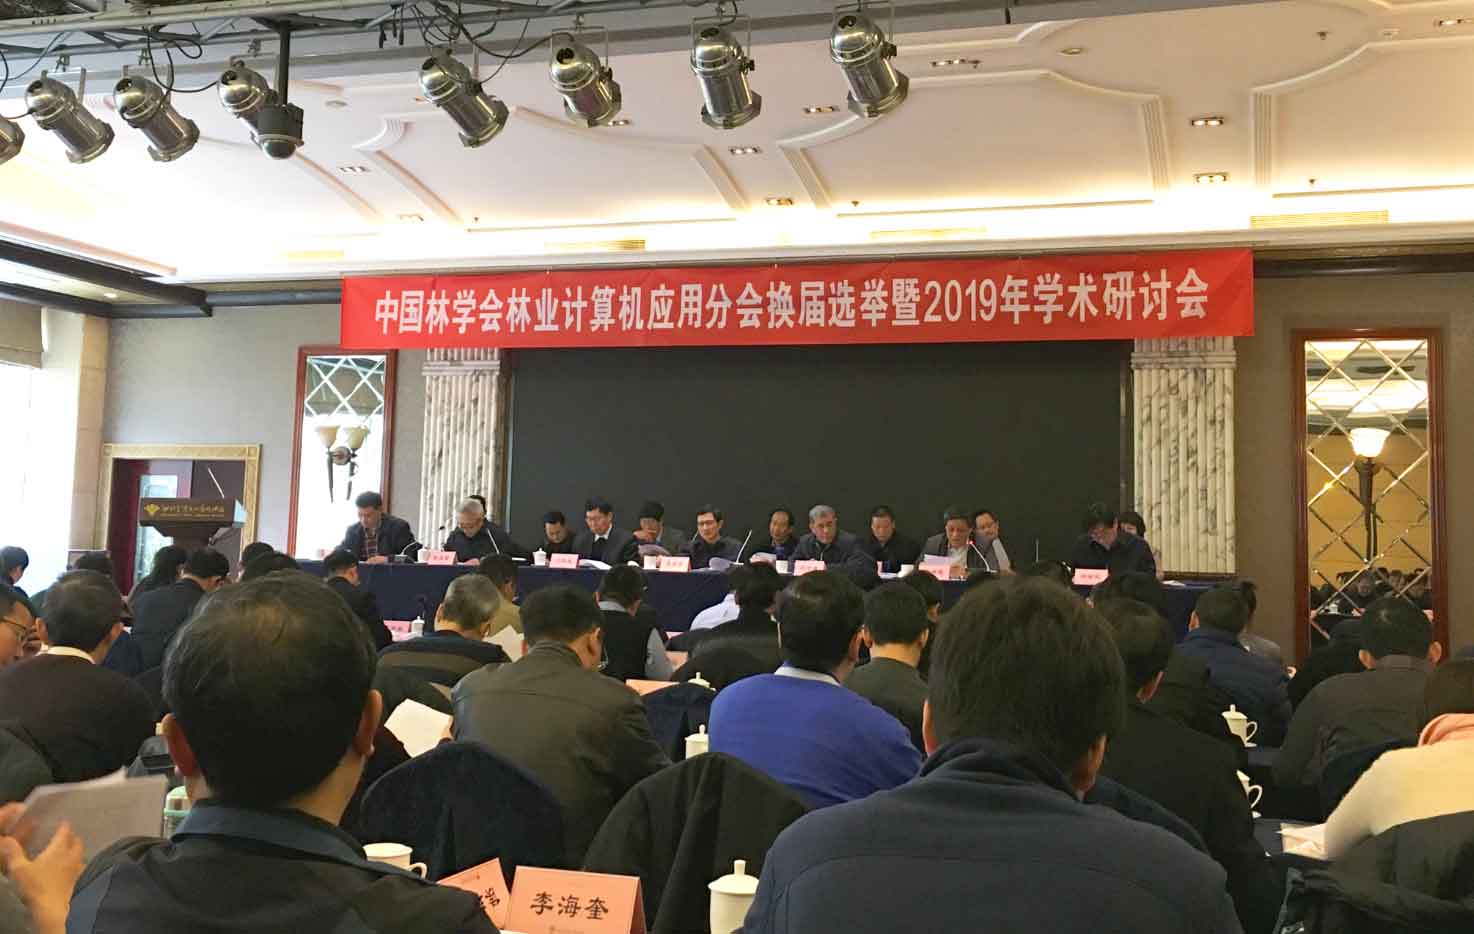 SEASTARS CORP.,LTD. shares was invited to participate in the China Forestry Society Forestry Computer Application Branch general election and 2019 academic seminar